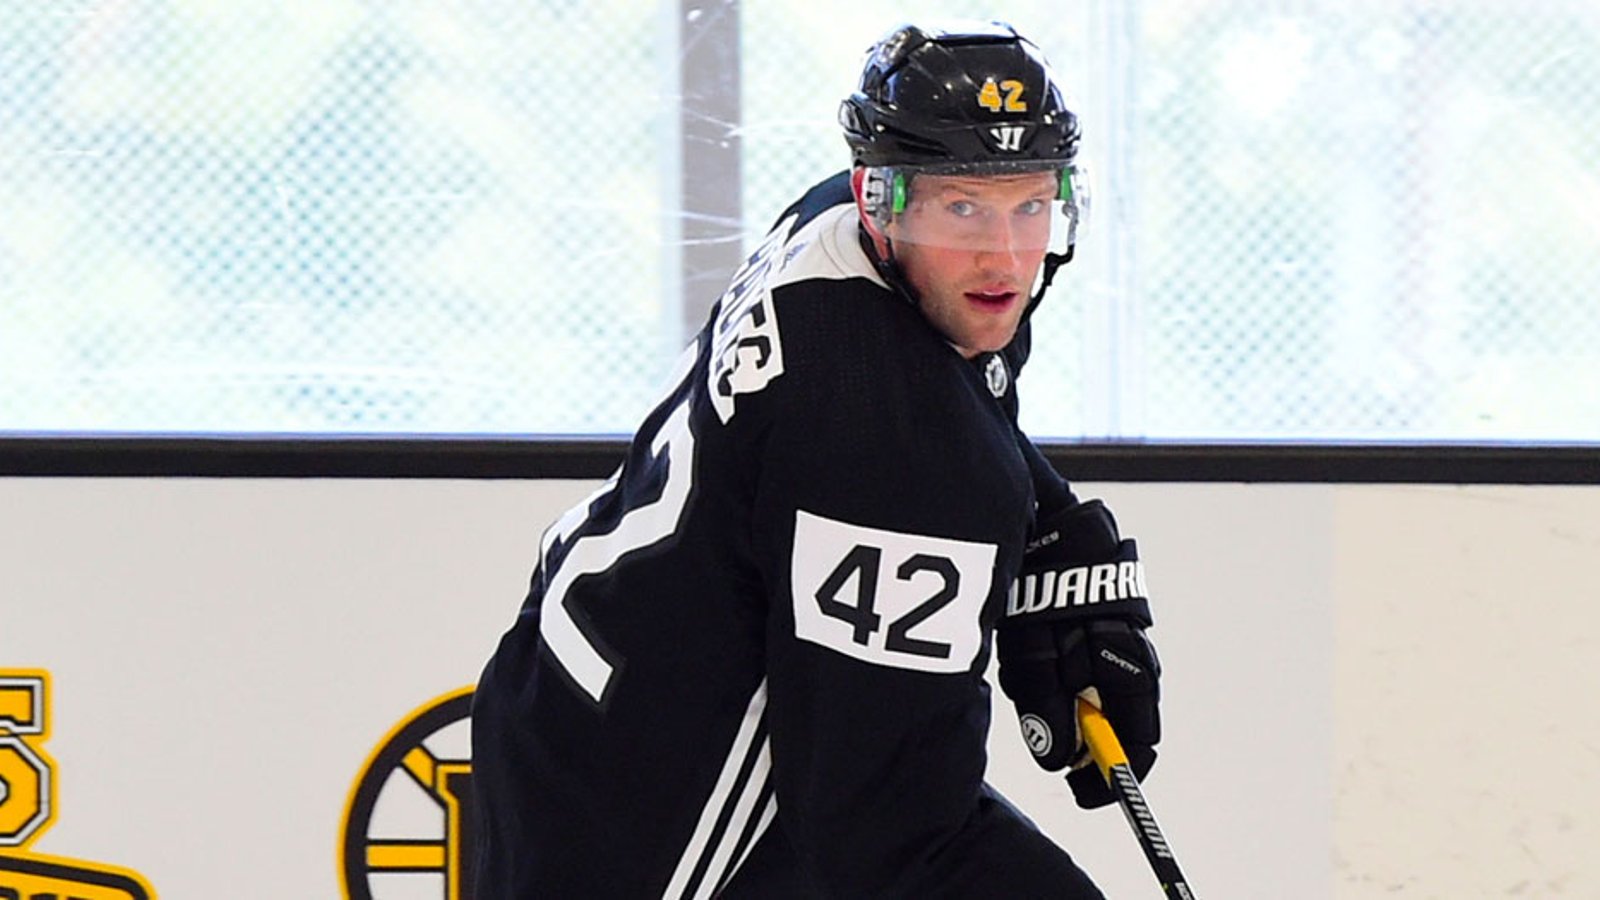 Bruins’ Backes gets team of 12-year-old girls to help him for the 2019-20 season